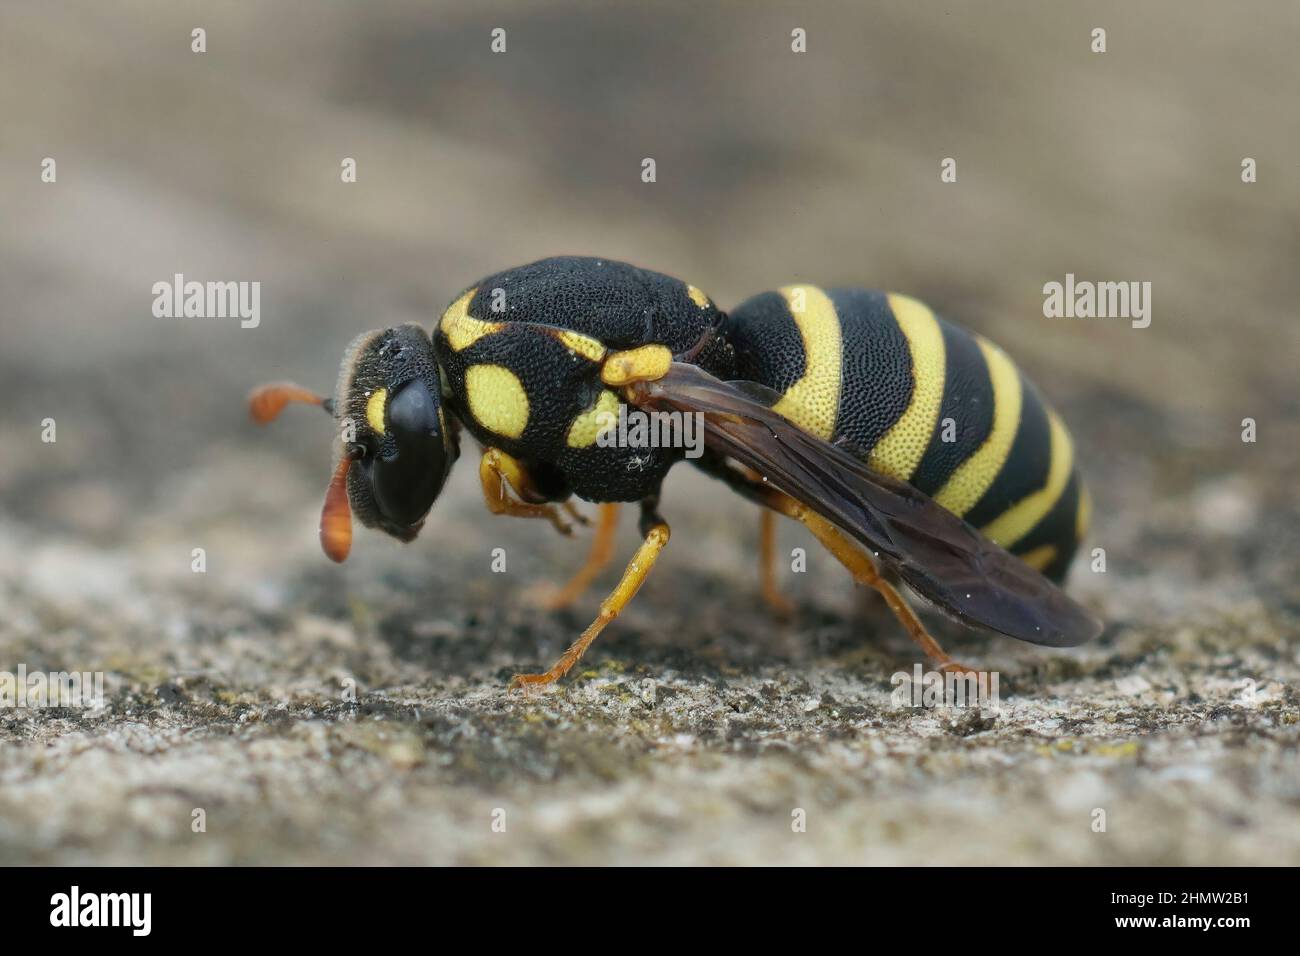 Closeup on a small tiny Mediterranean wasp, Celonites abbreviatus From Southern France sitting on wood Stock Photo